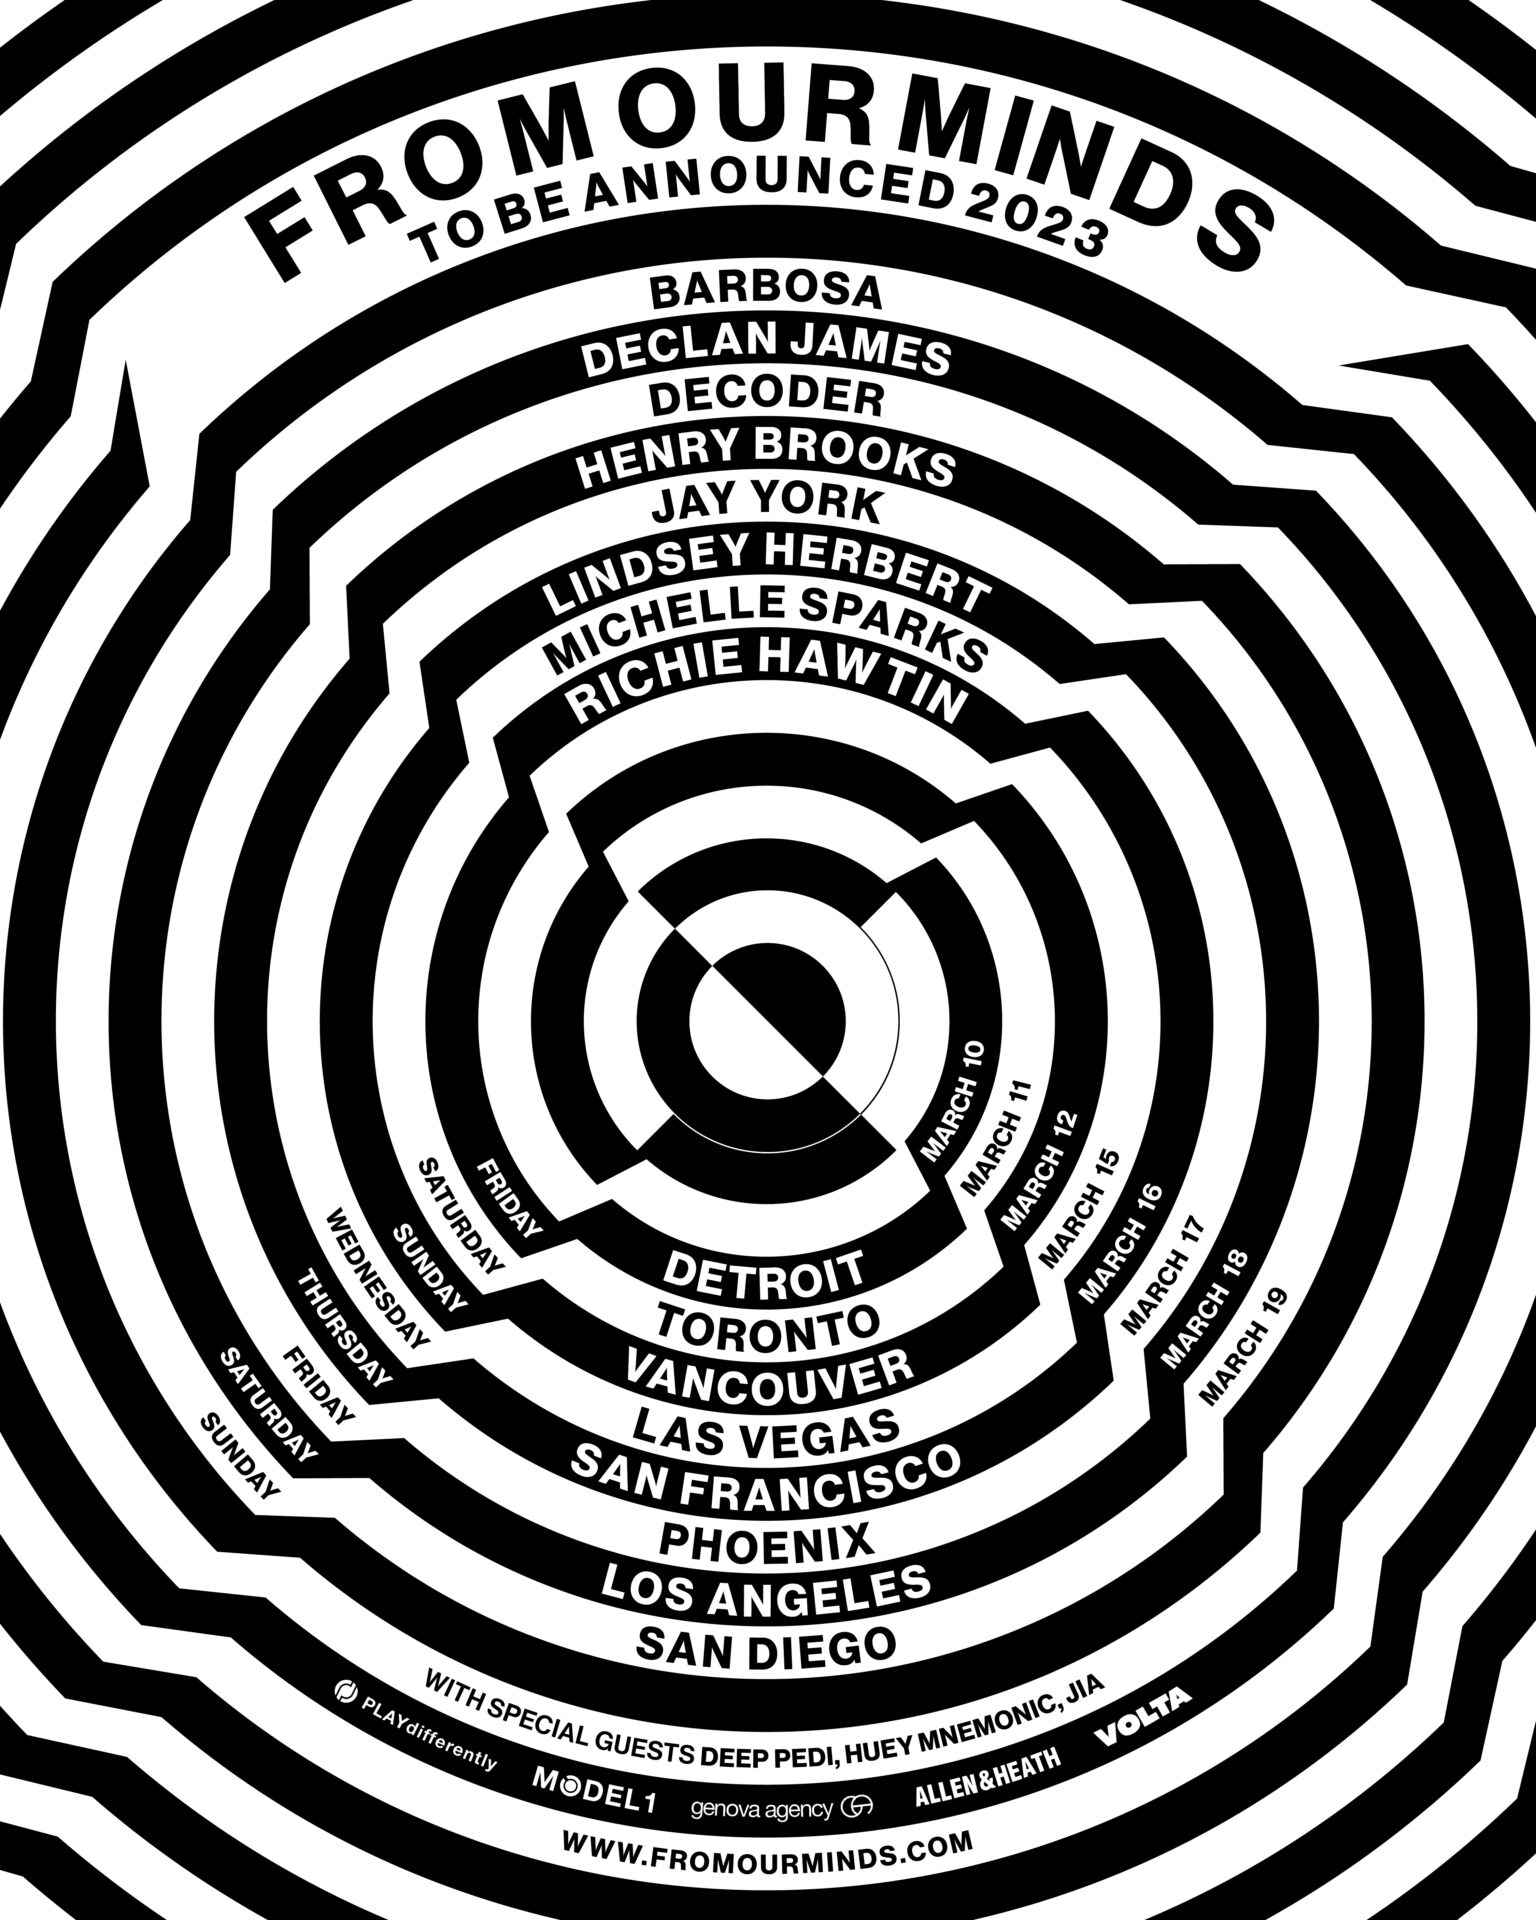 Richie Hawtin’s Tour Partners with Aslice for Fairer Music Ecosystem